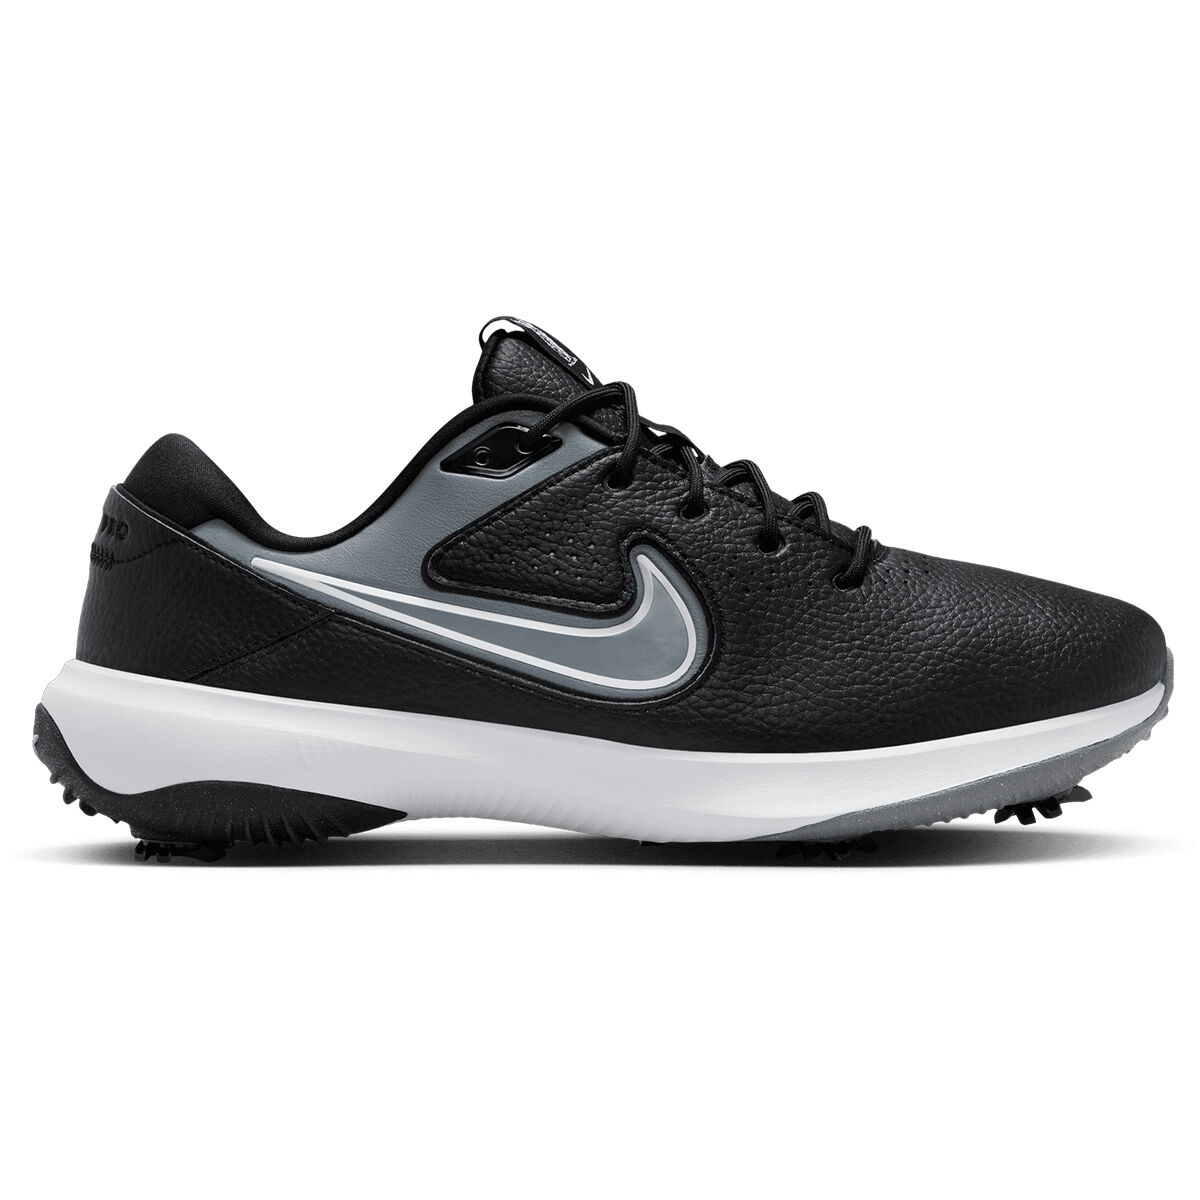 Nike Men’s Victory Pro 3 Waterproof Spiked Golf Shoes, Mens, Black/white/cool grey, 9 | American Golf